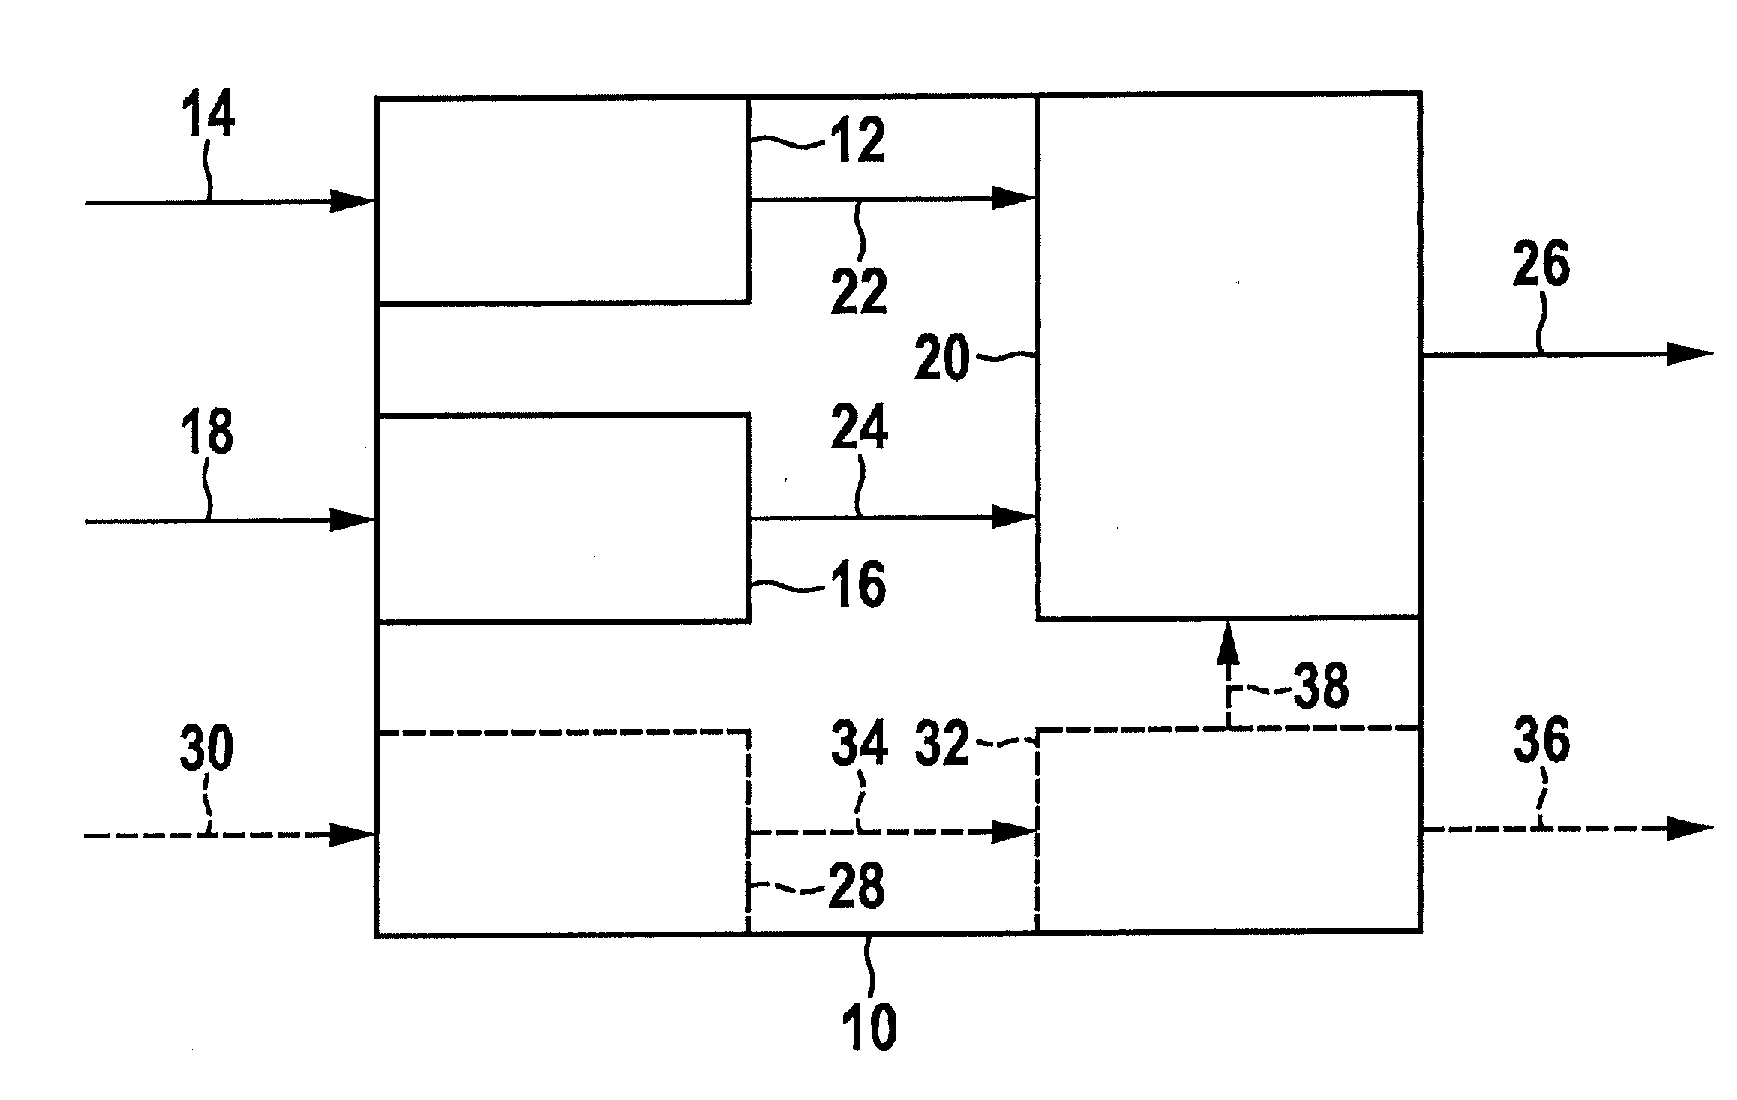 Control device and method for operating a braking system equipped with an electric drive device and/or generator device